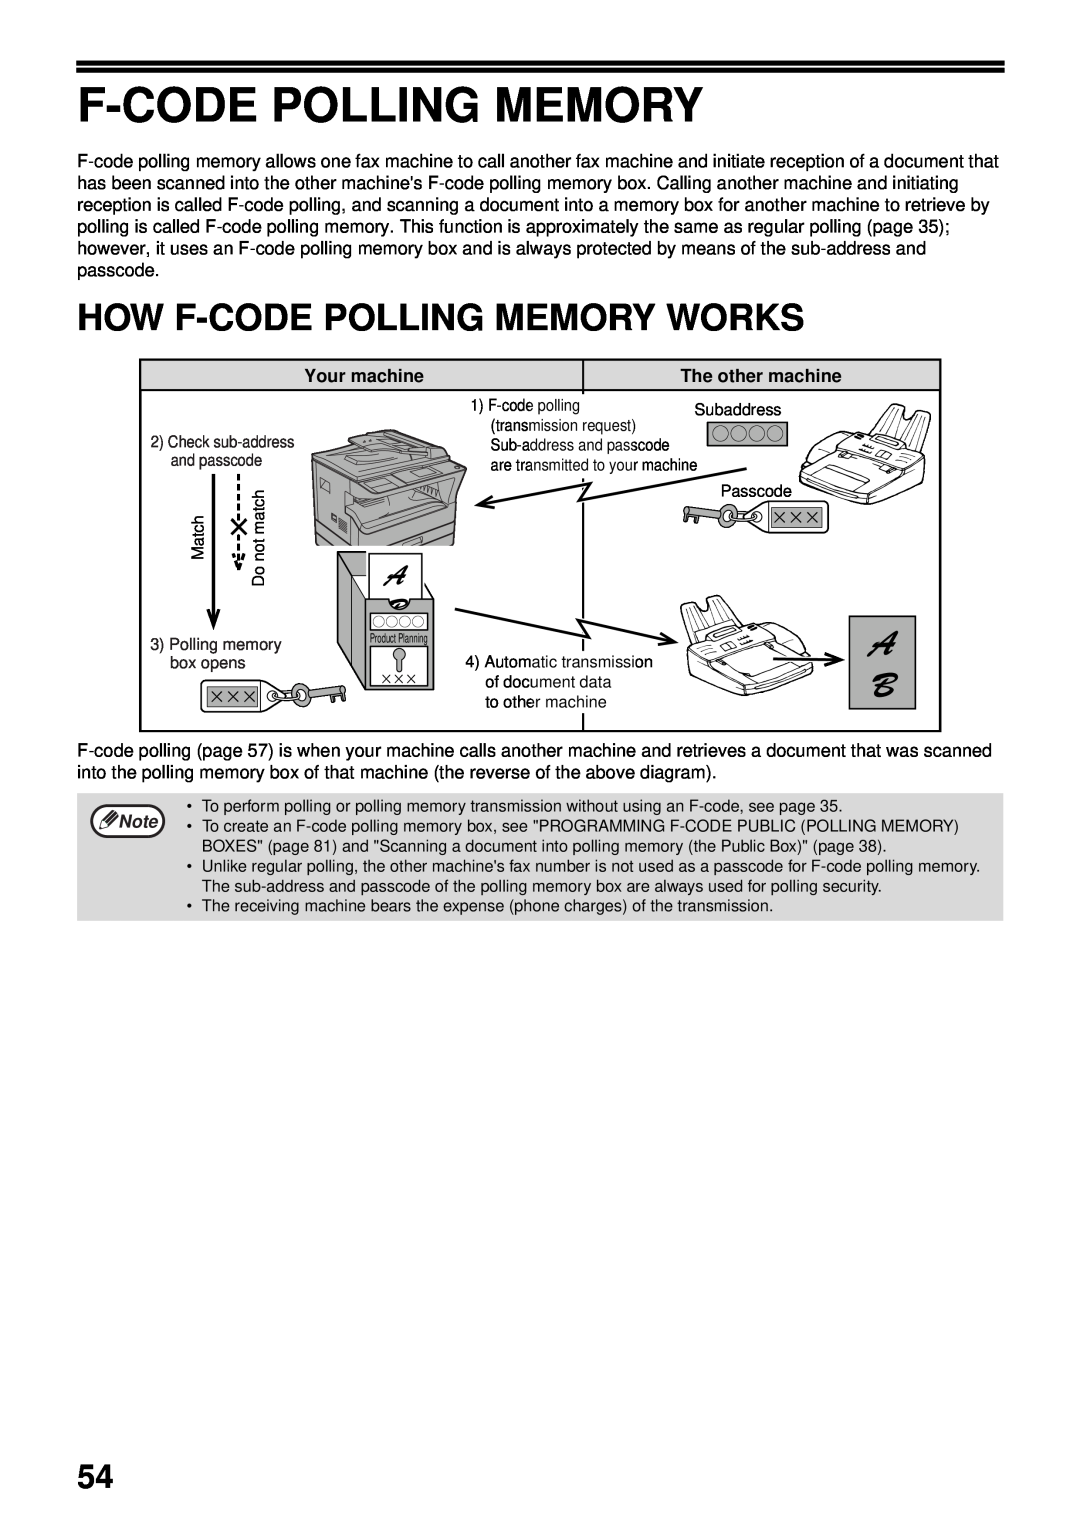 Sharp MX-FX13 appendix How F-Code Polling Memory Works, Your machine, The other machine 